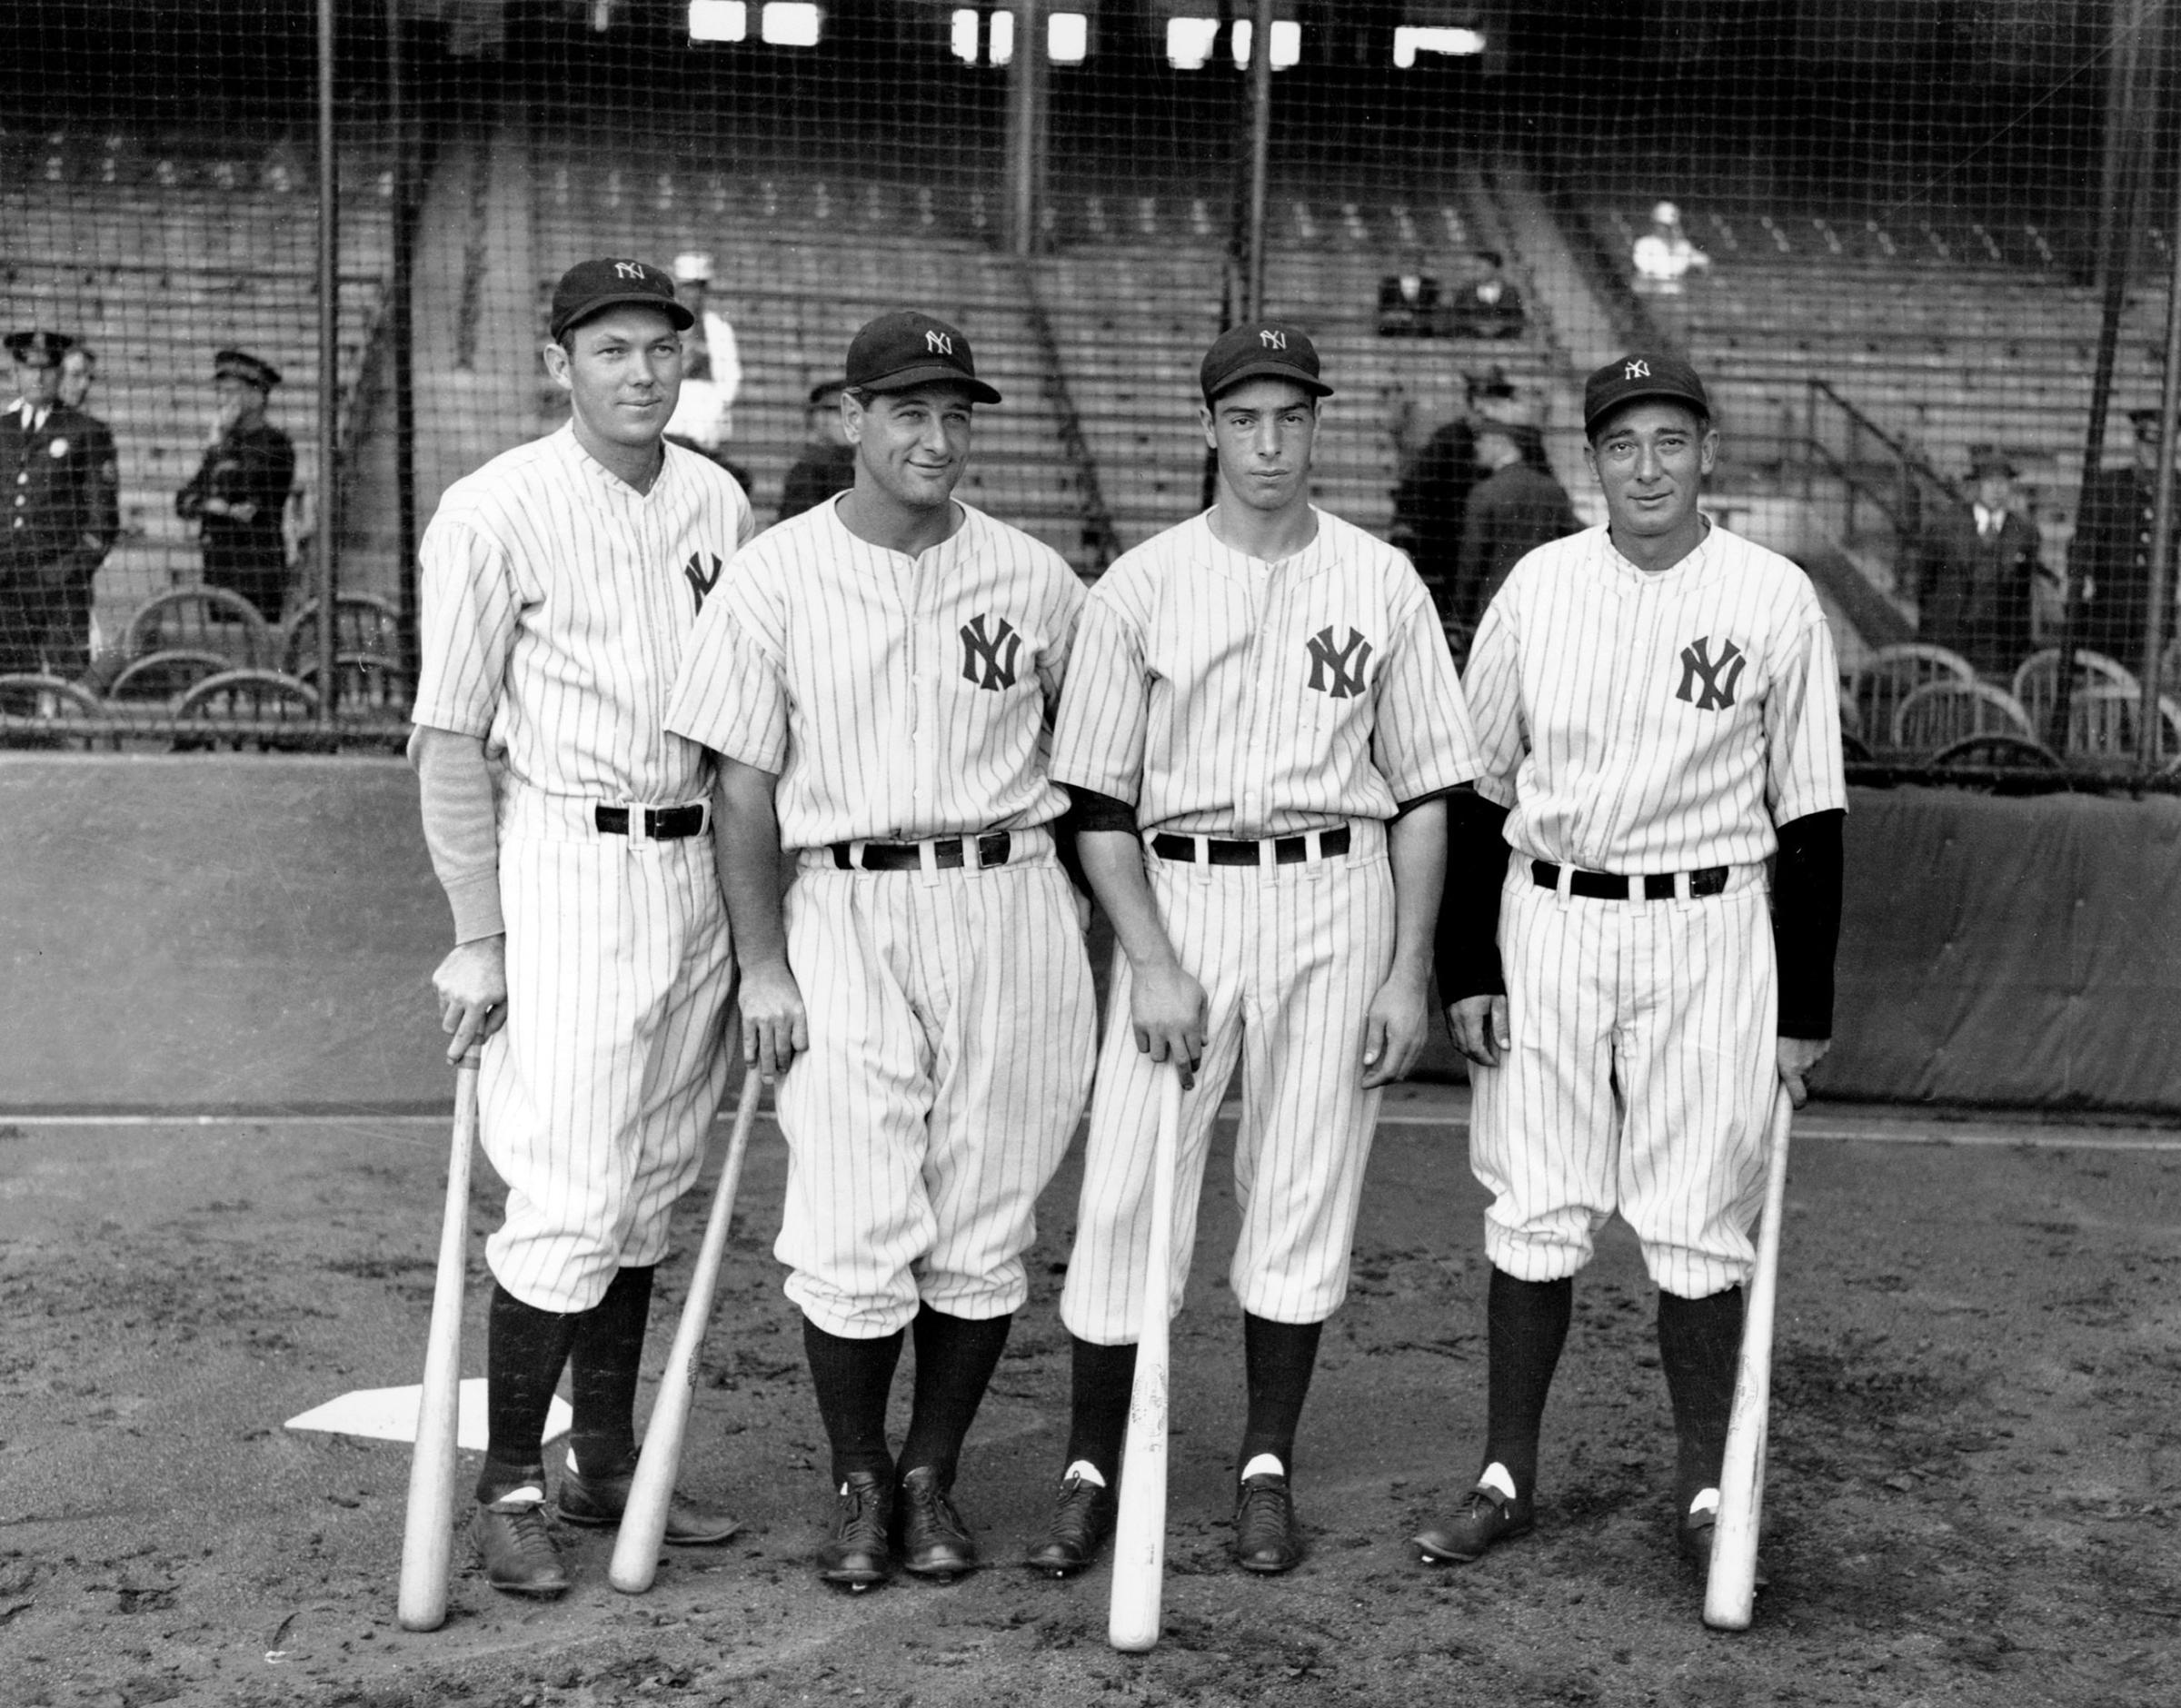 Four New York Yankees sluggers pose together at Yankee Stadium Sept. 20, 1936. From left: Bill Dickey, Lou Gehrig, Joe DiMaggio and Tony Lazzeri. The Yankees went on to win the World Series over the New York Giants in six games.